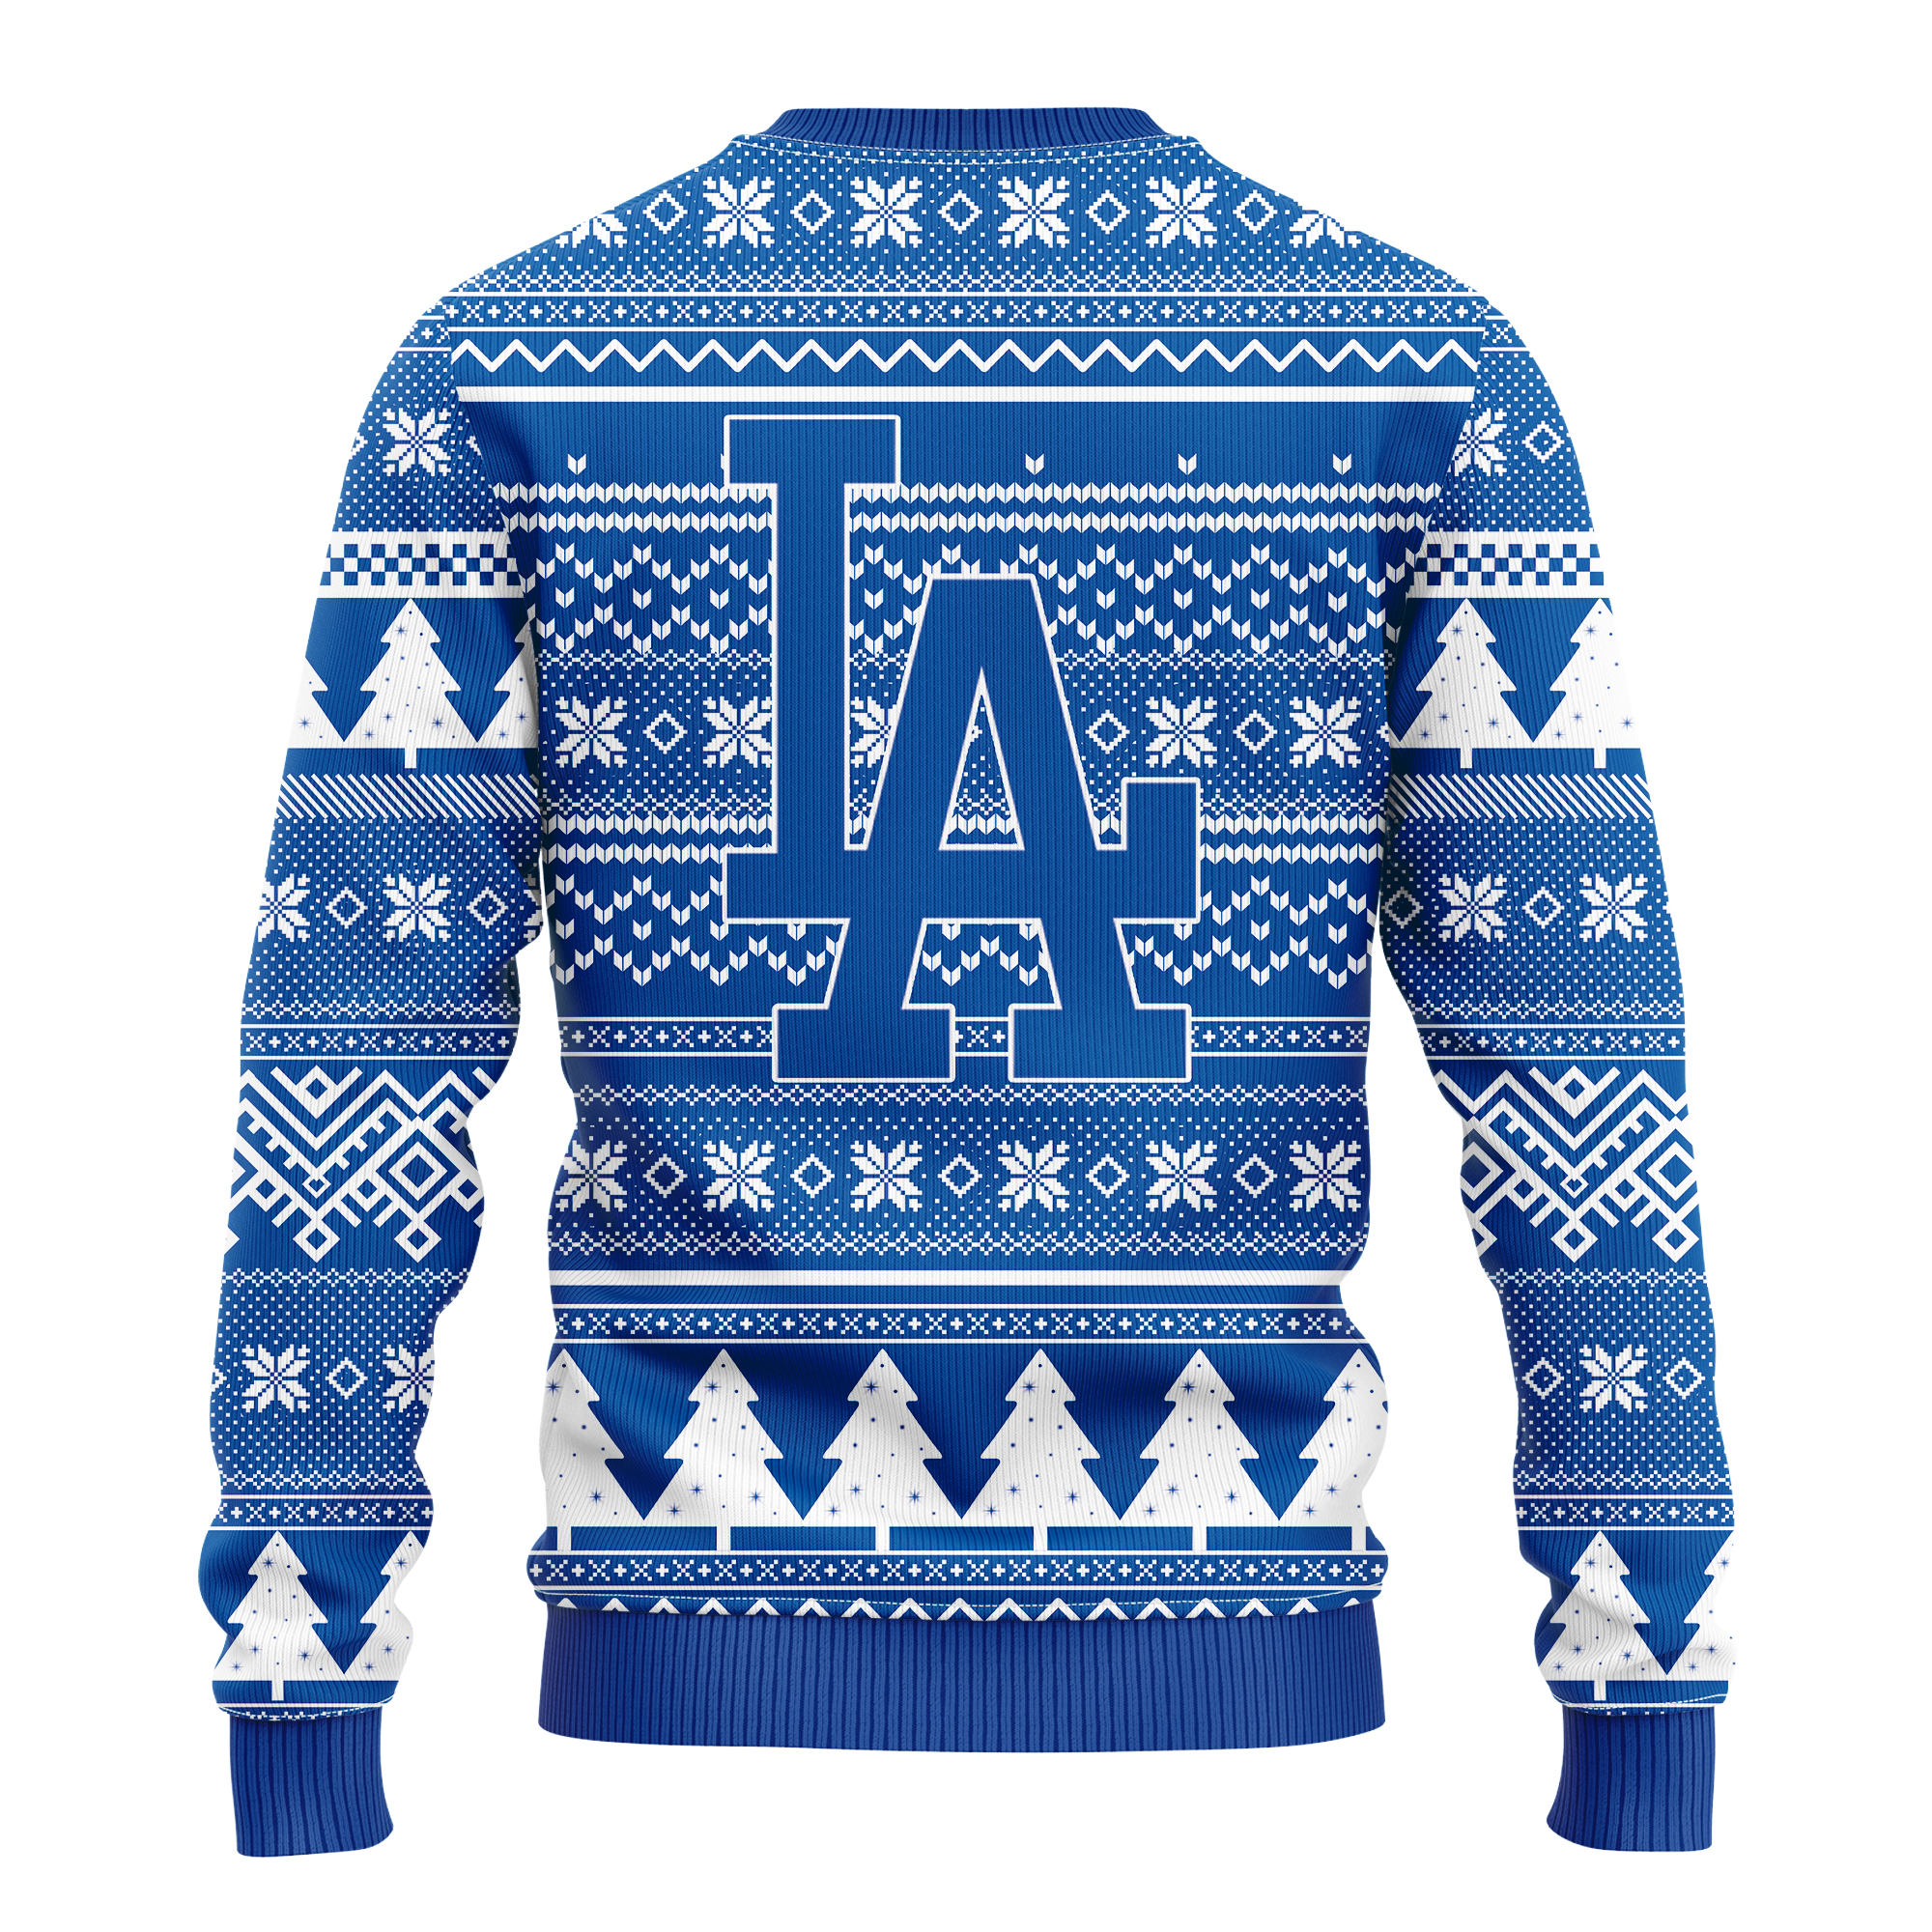 los angeles dodgers world champions ugly sweater 2